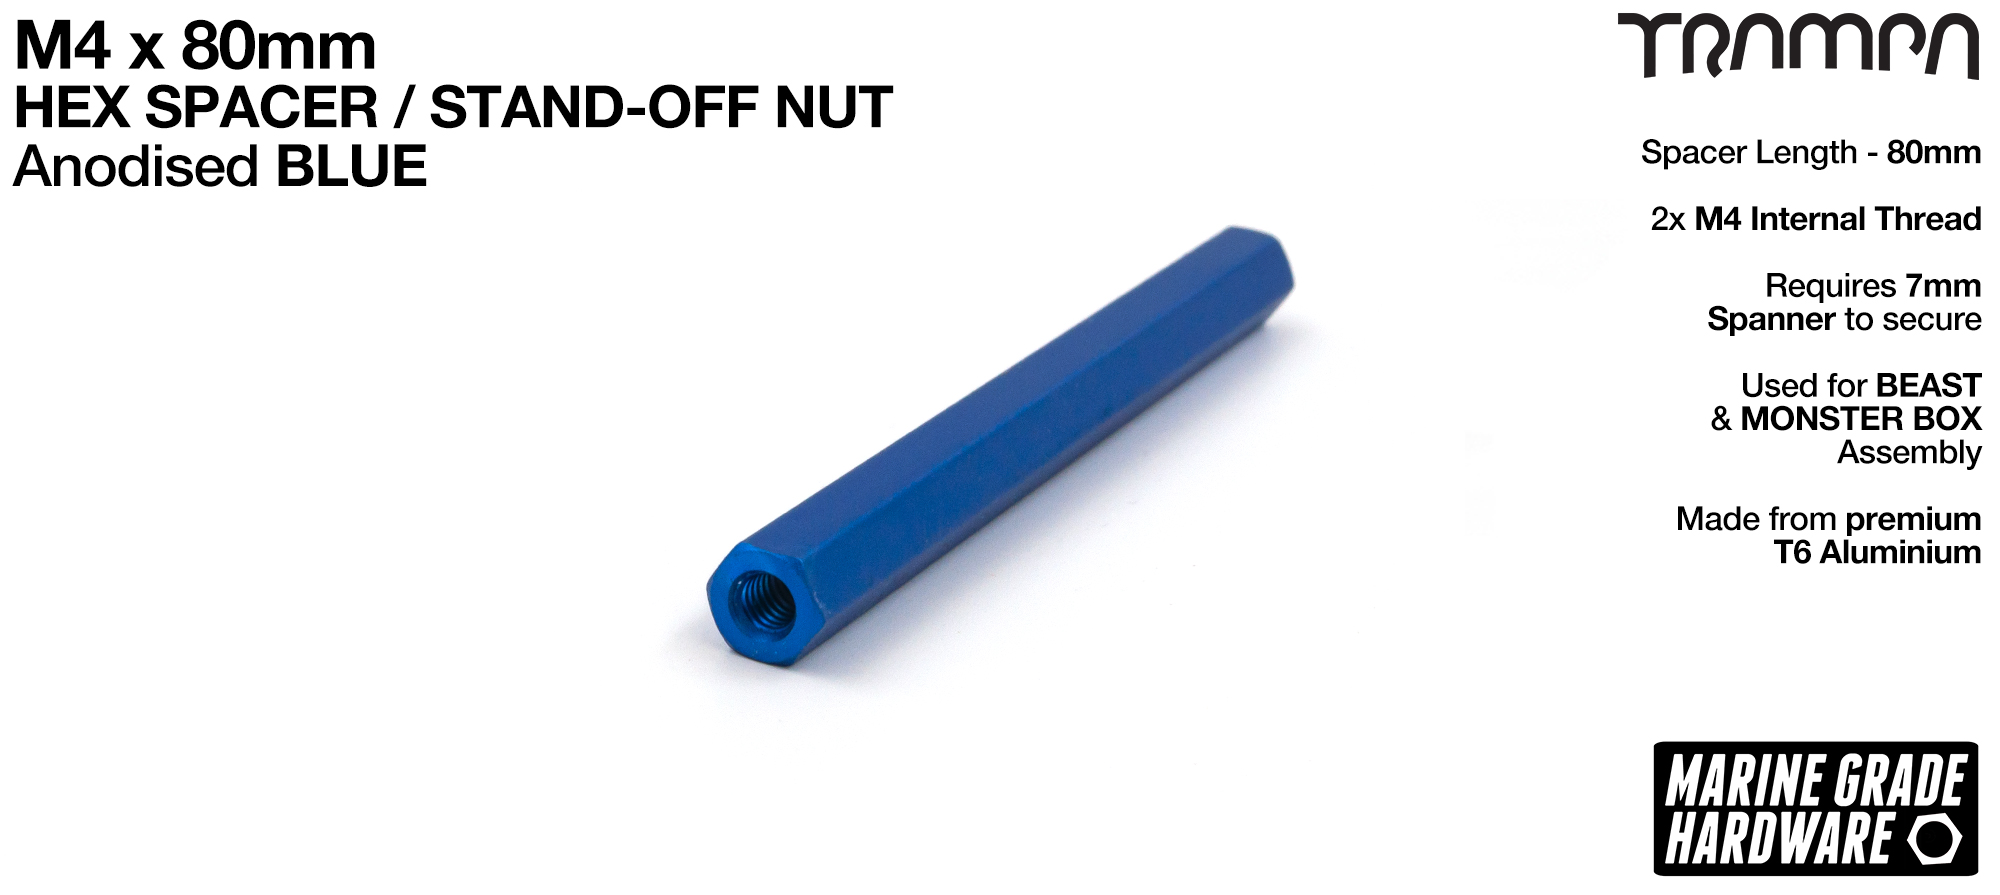 M4 x 80mm Aluminium Threaded Spacer Nut Used for assembling the BEAST Battery Boxes - BLUE